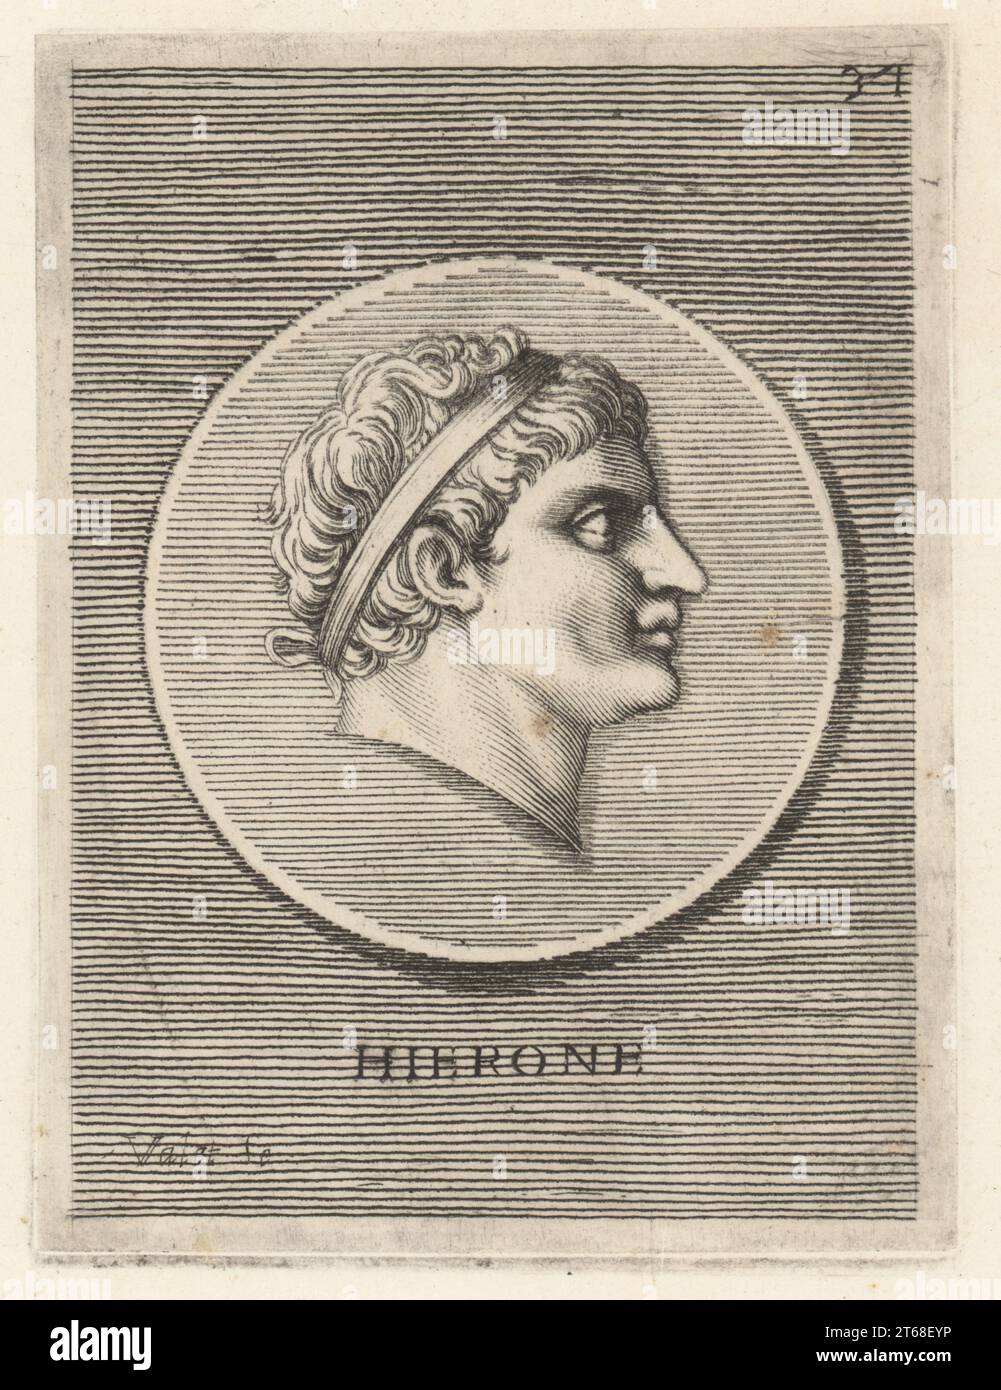 Hiero I, or Hieron I, tyrant of Syracuse, Sicily, 478 to 467 BC. Son of Deinomenes, and brother of Gelon. He sided with the Cumaeans in their battle against the Etruscans at the Battle of Cumae 474 BC. Head of a man wearing royal diadem from a bronze medal. Hierone. Copperplate engraving by Guillaume Vallet after Giovanni Angelo Canini from Iconografia, cioe disegni d'imagini de famosissimi monarchi, regi, filososi, poeti ed oratori dell' Antichita, Drawings of images of famous monarchs, kings, philosophers, poets and orators of Antiquity, Ignatio deLazari, Rome, 1699. Stock Photo